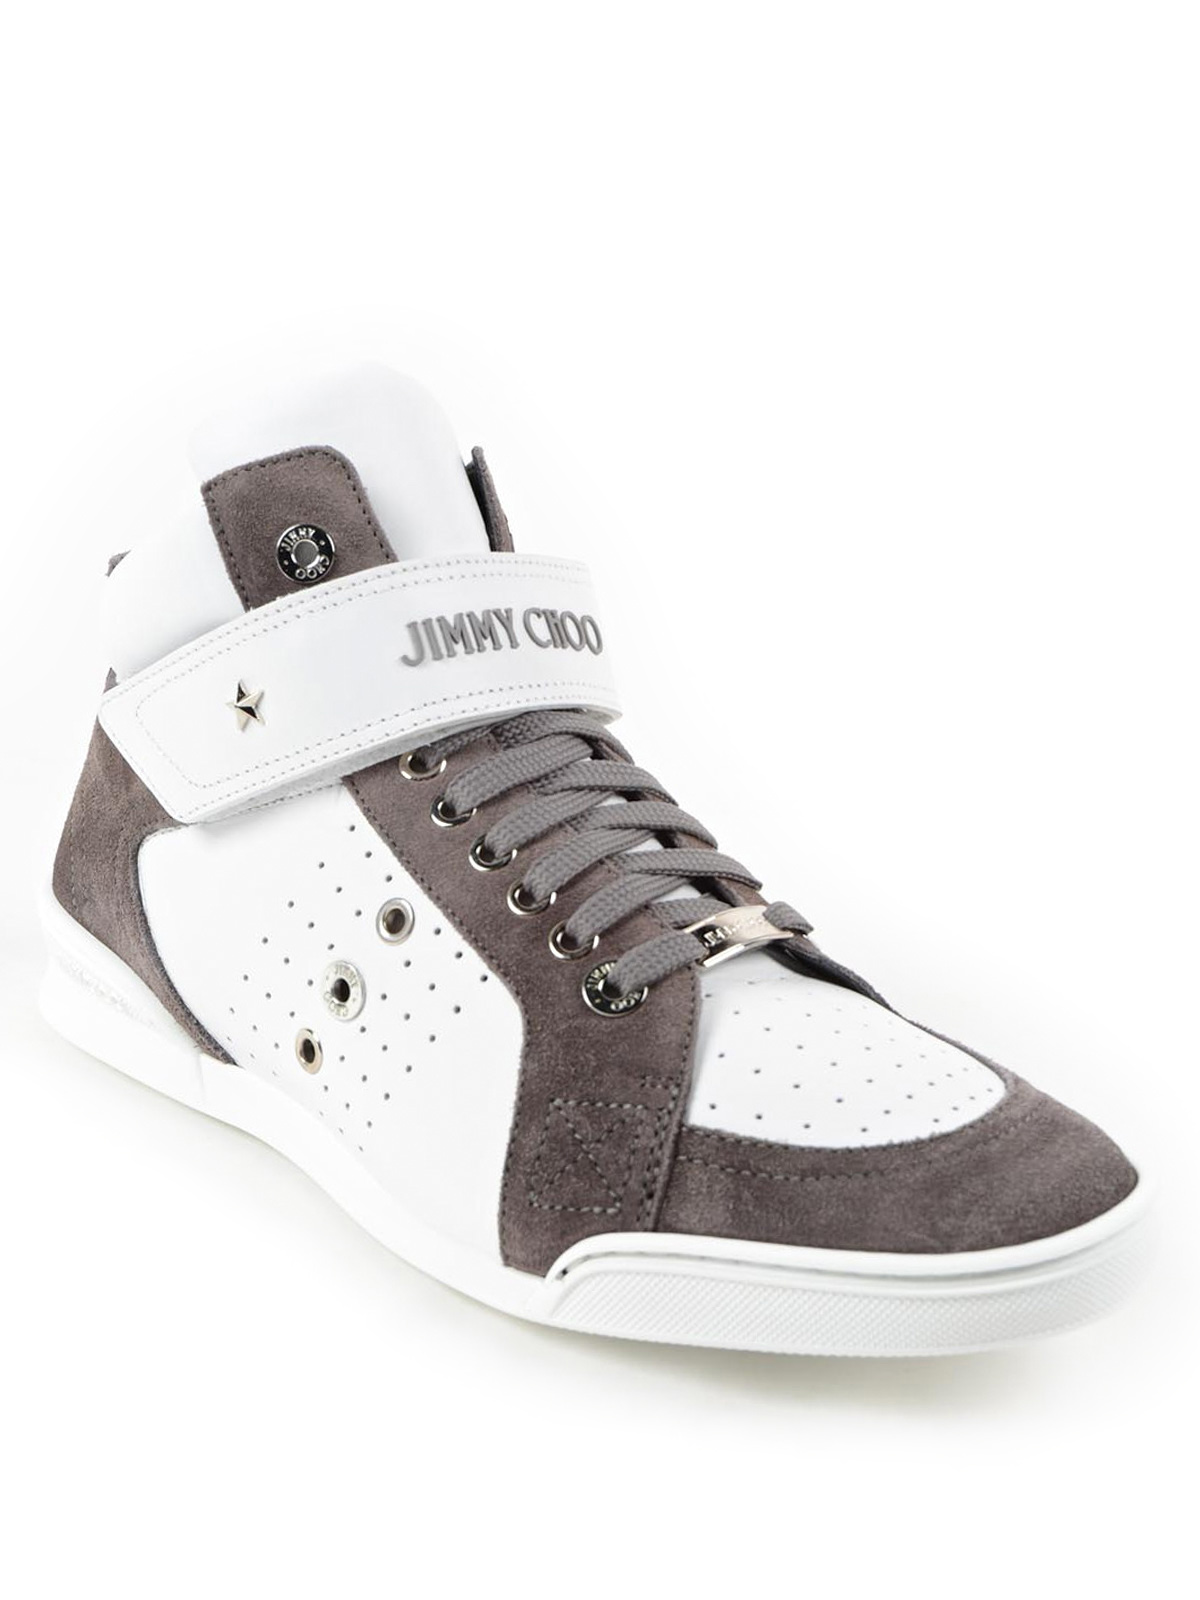 Jimmy Choo Lewis Two Tone High Top Sneakers Trainers Lewisocuwhiteiron